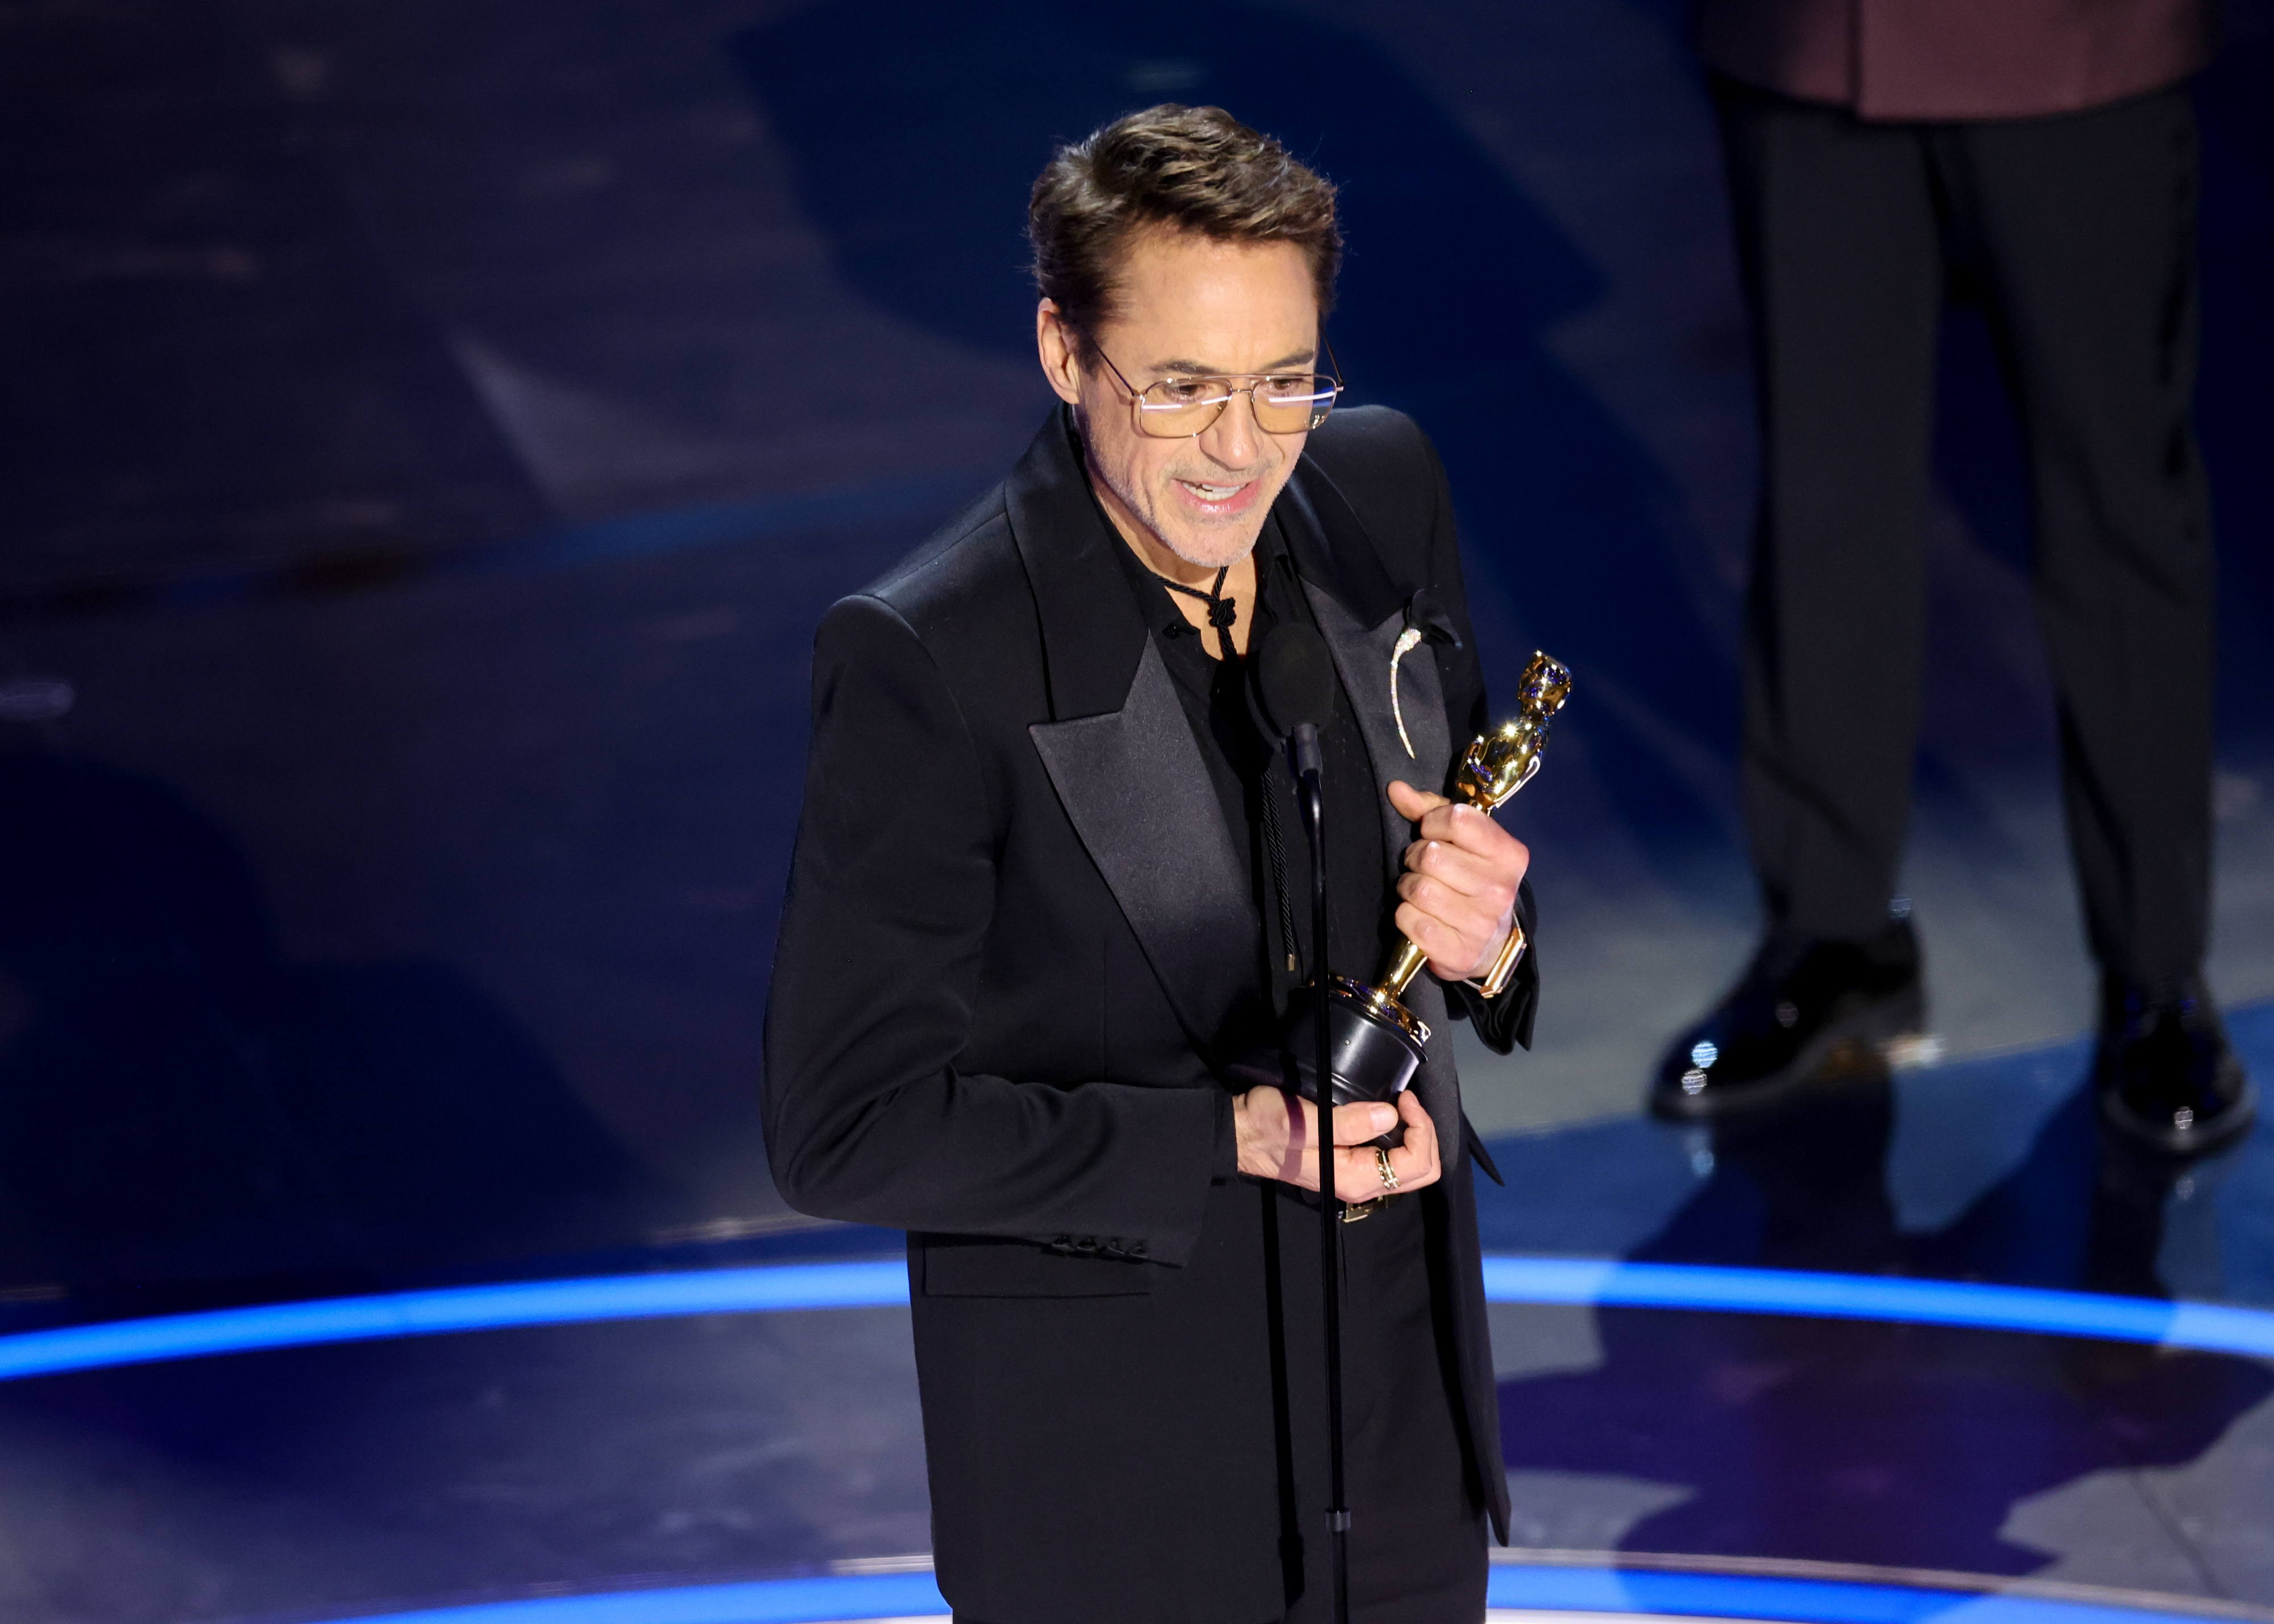 RDJ in a suit holding an Oscar onstage